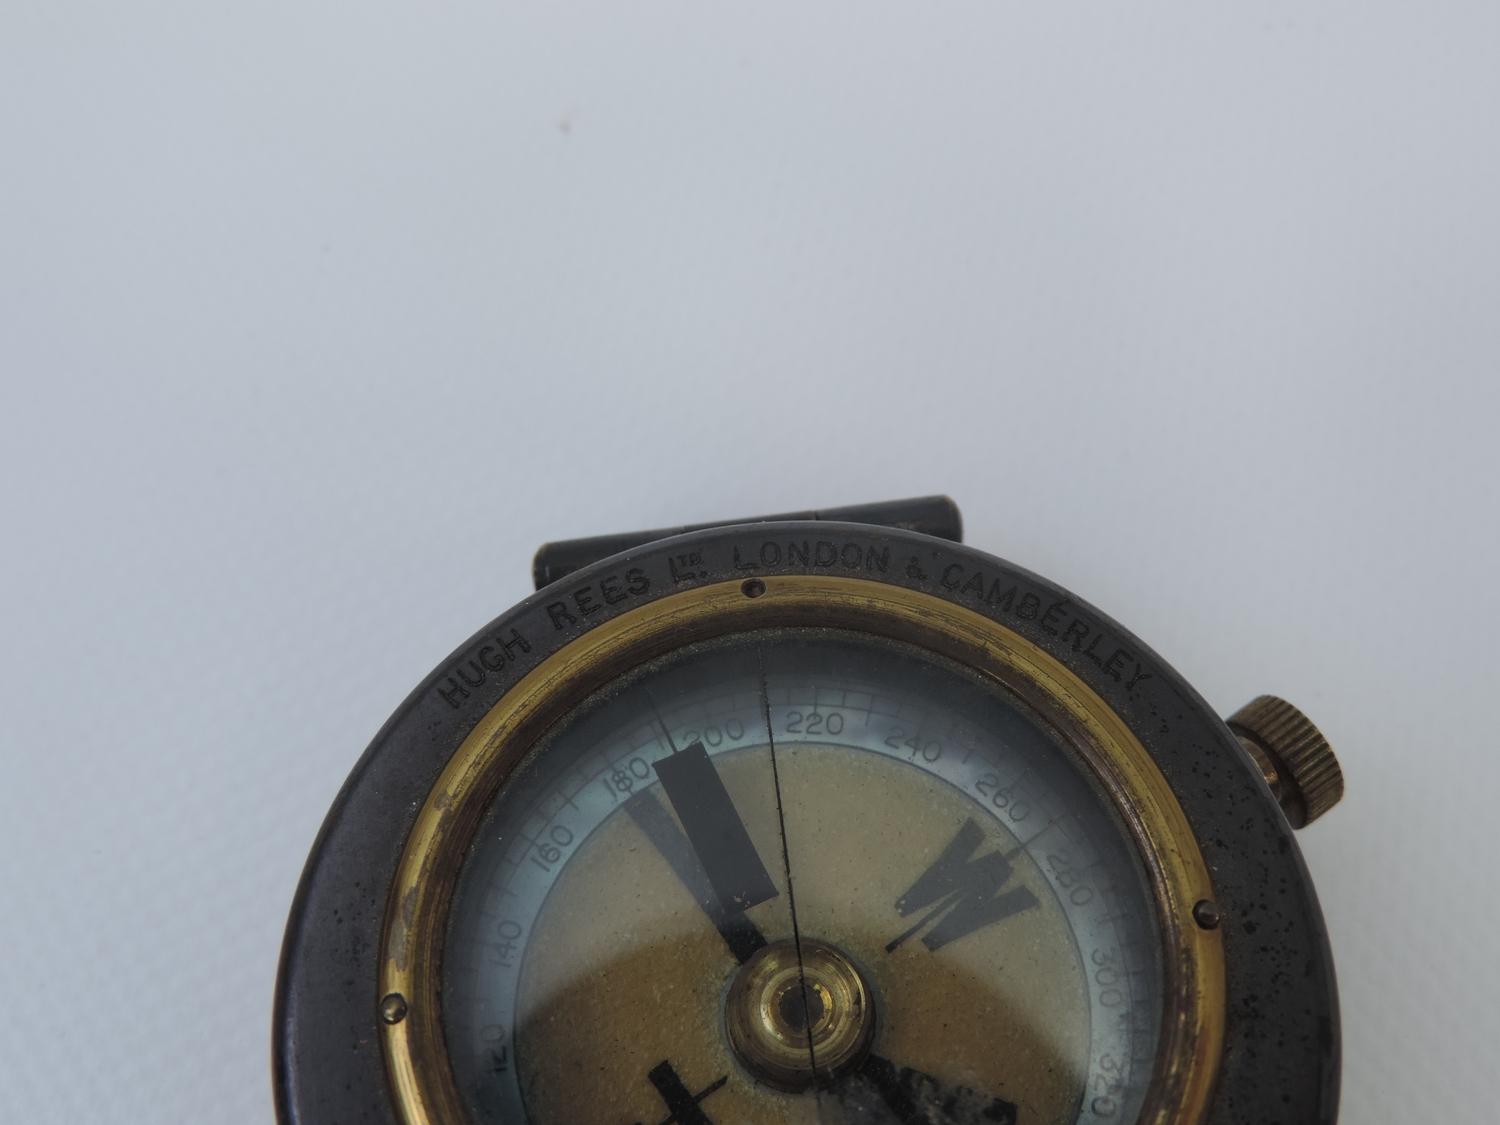 WWI Mother of Pearl Faced Compass - Hugh Rees London and Camberley - Image 5 of 6